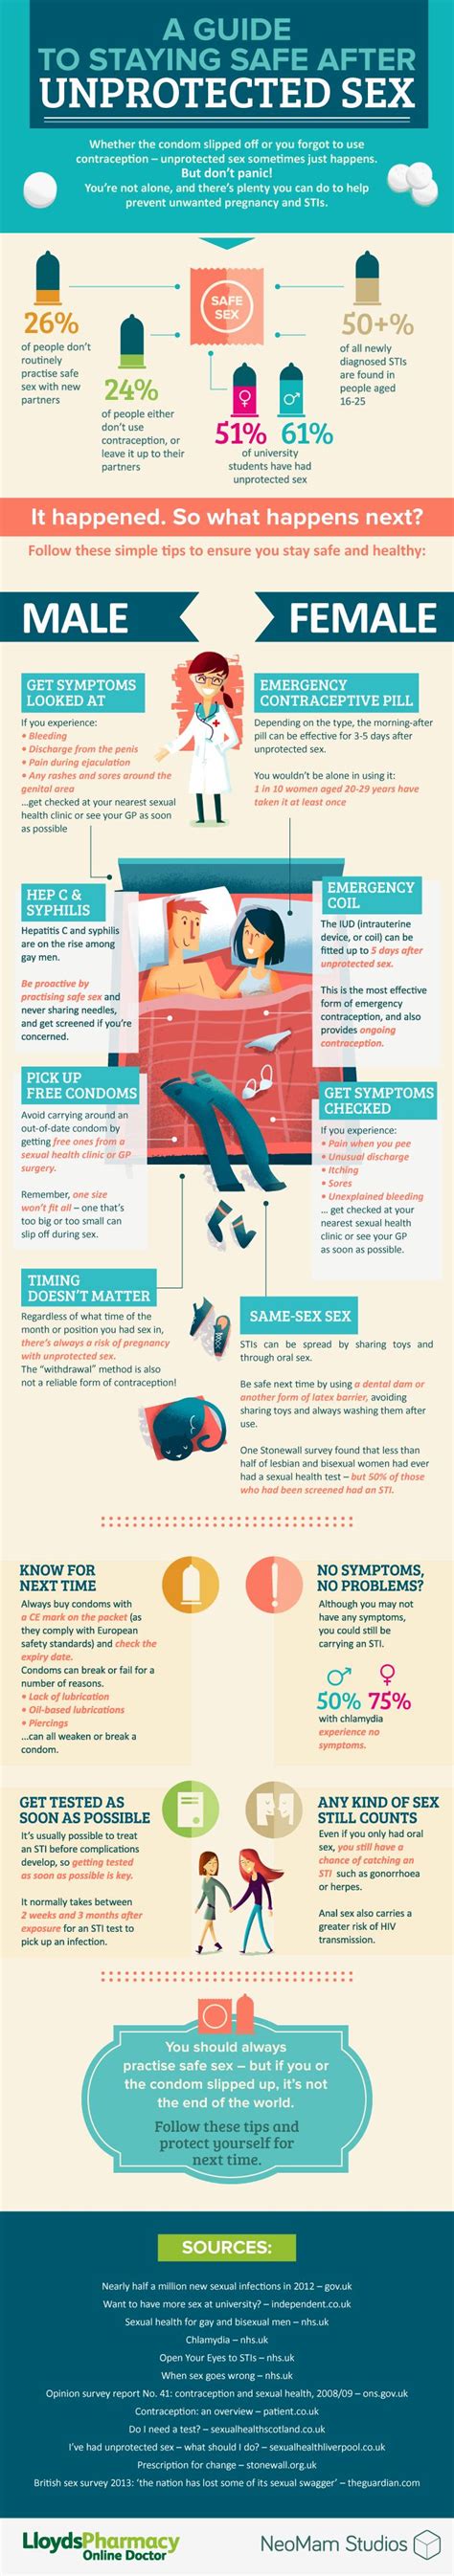 staying safe after unprotected sex ilias sounas infographics pinterest public